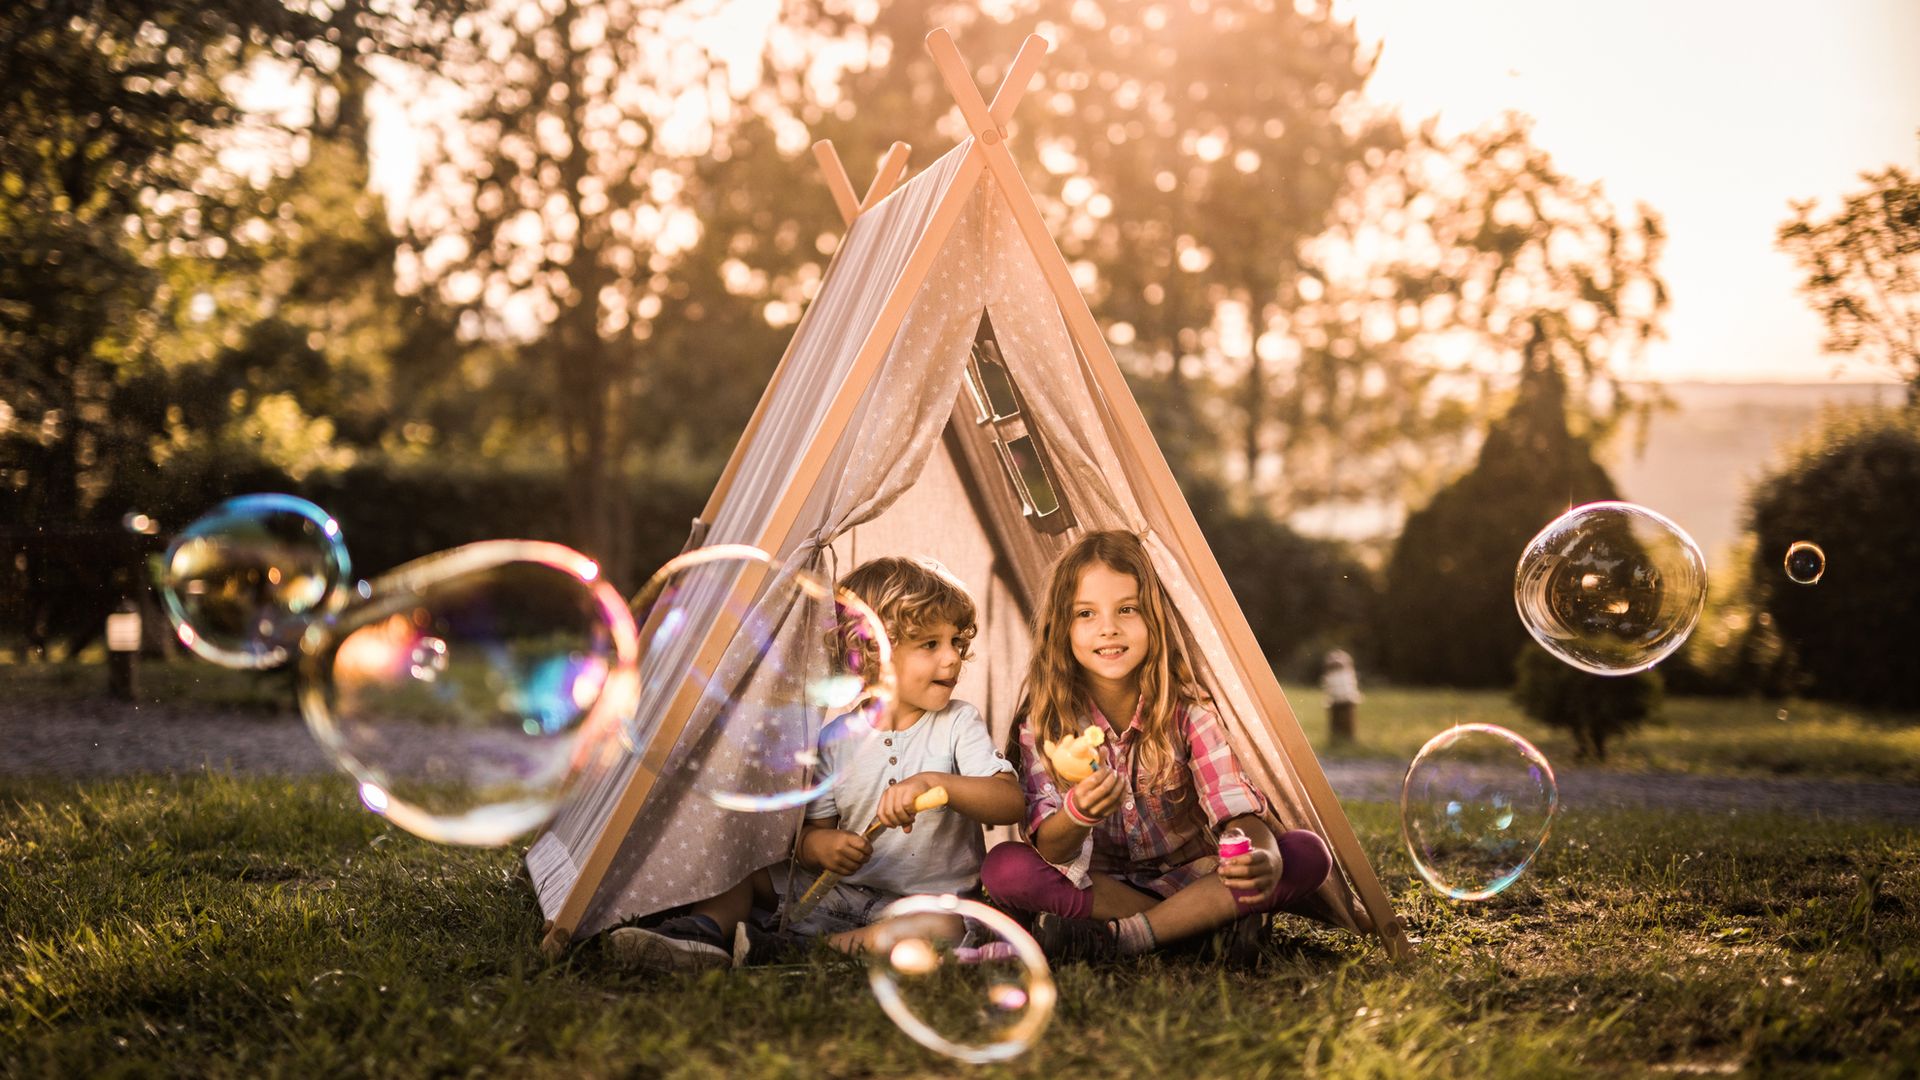 Two small siblings sitting in a tent in the backyard and playing with bubble wand